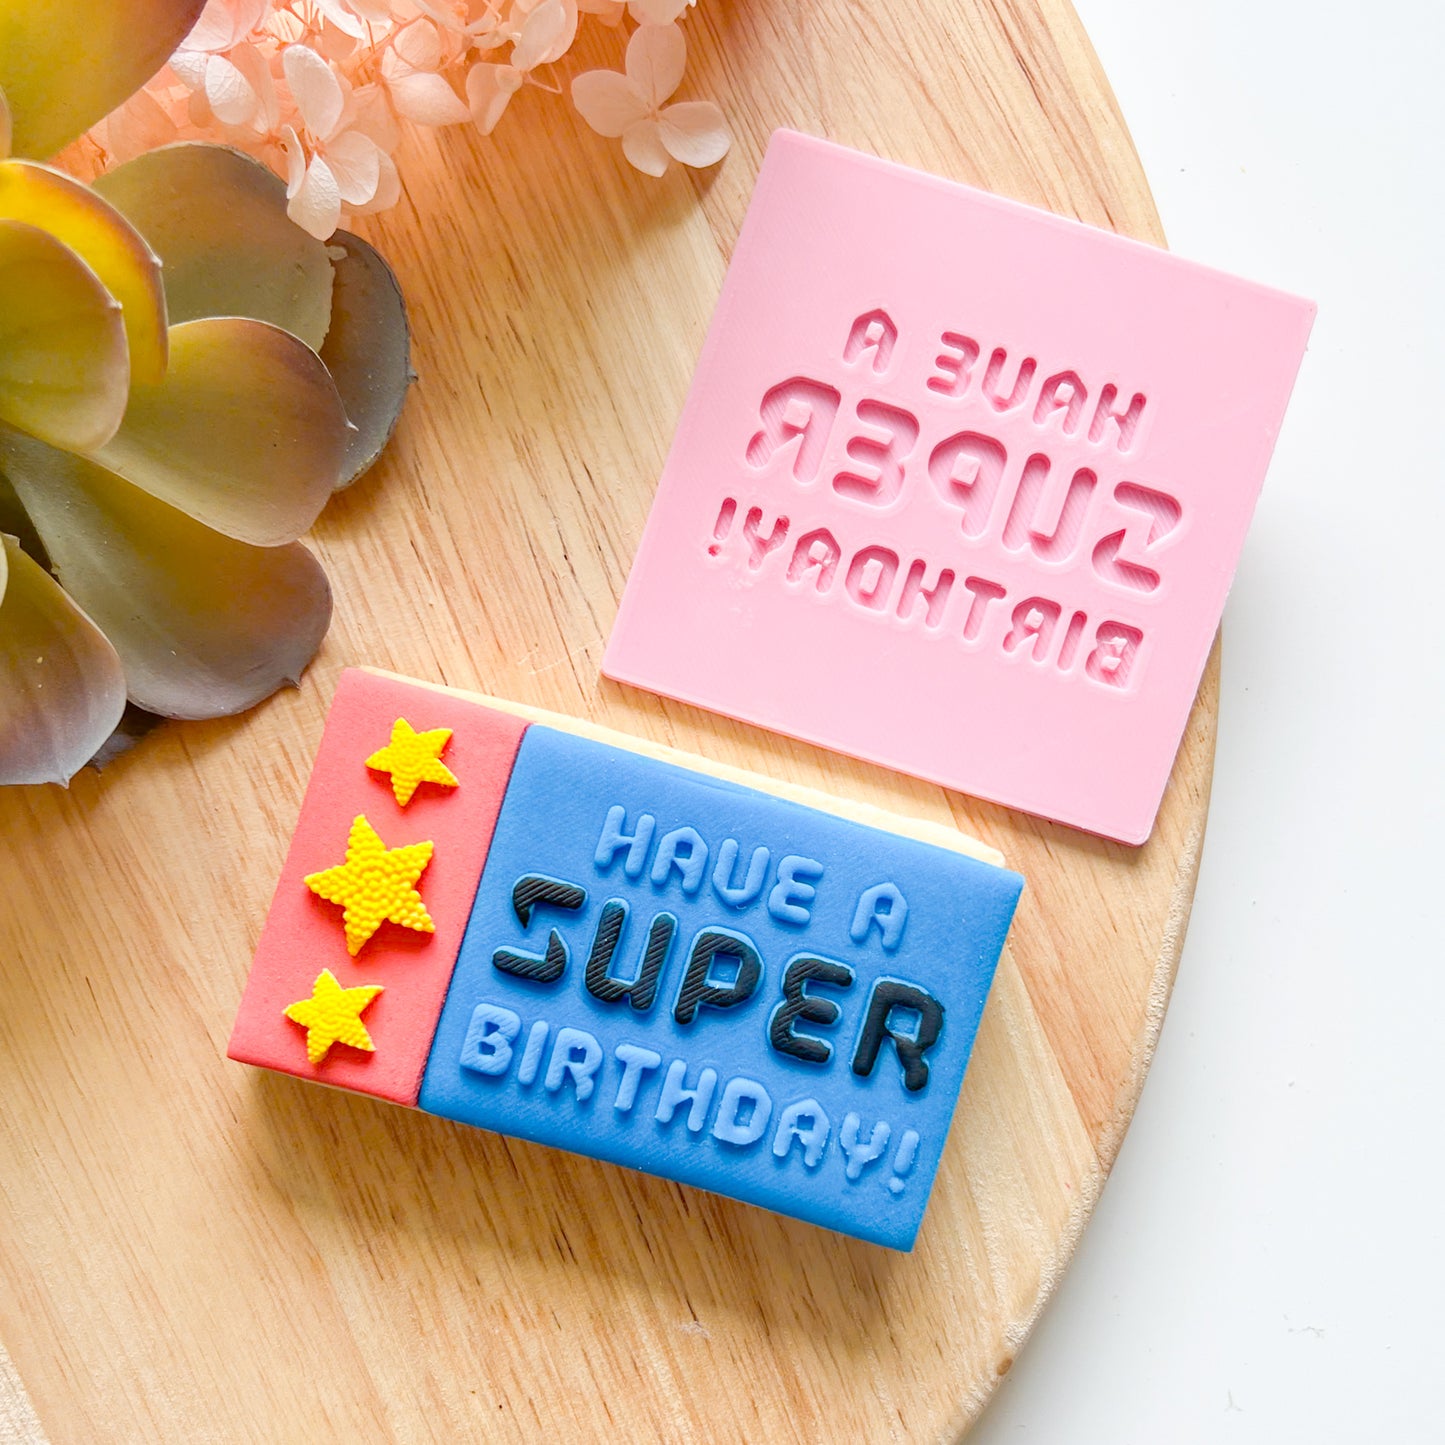 "Have a Super Birthday" - Embossing Stamp